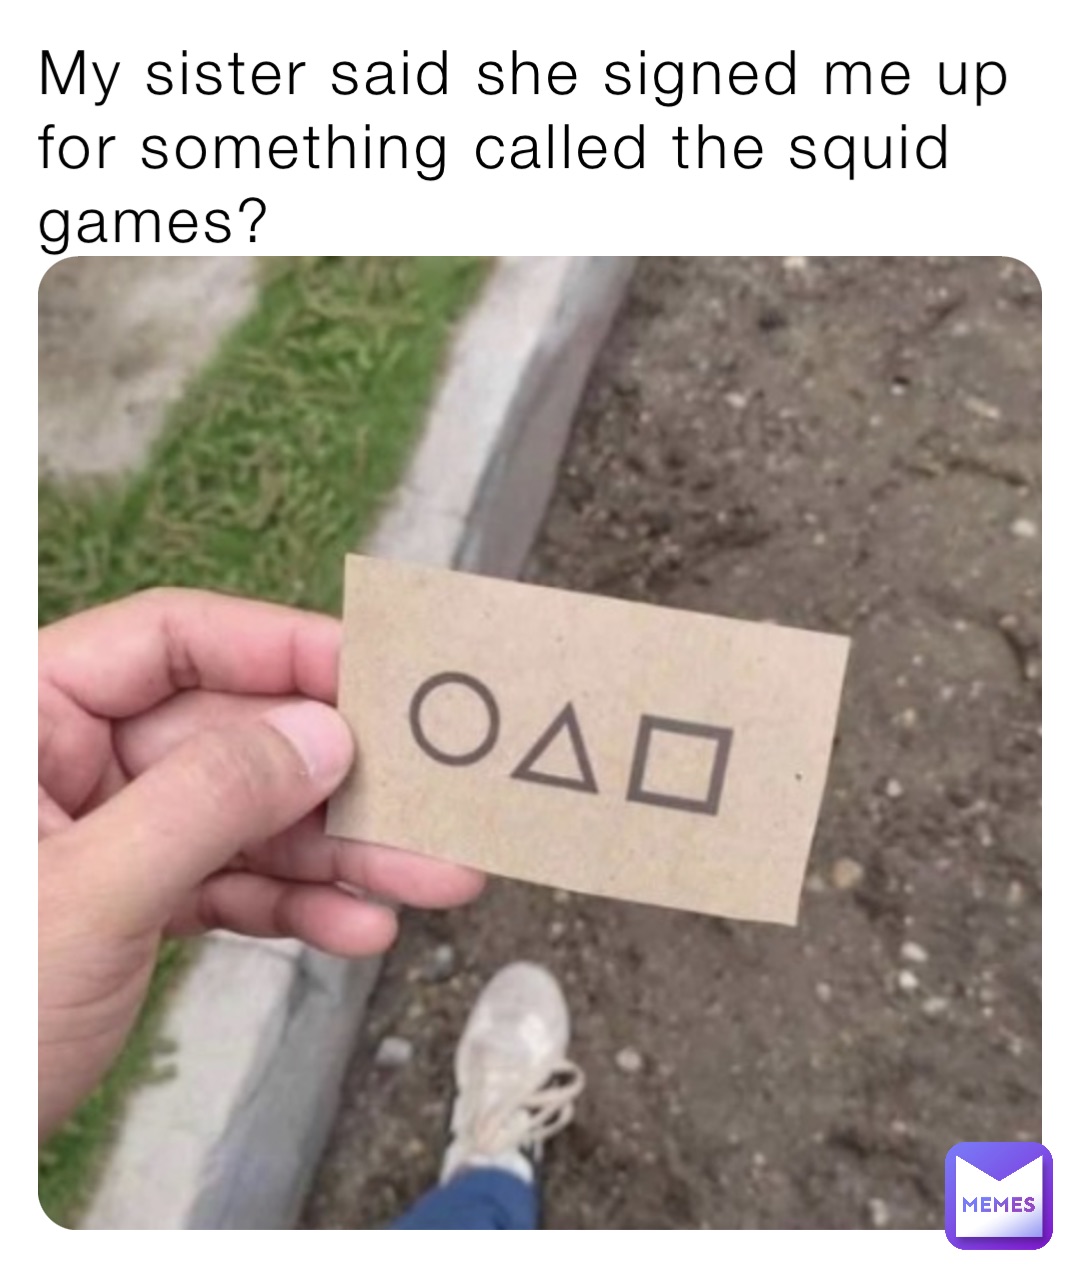 My sister said she signed me up for something called the squid games?